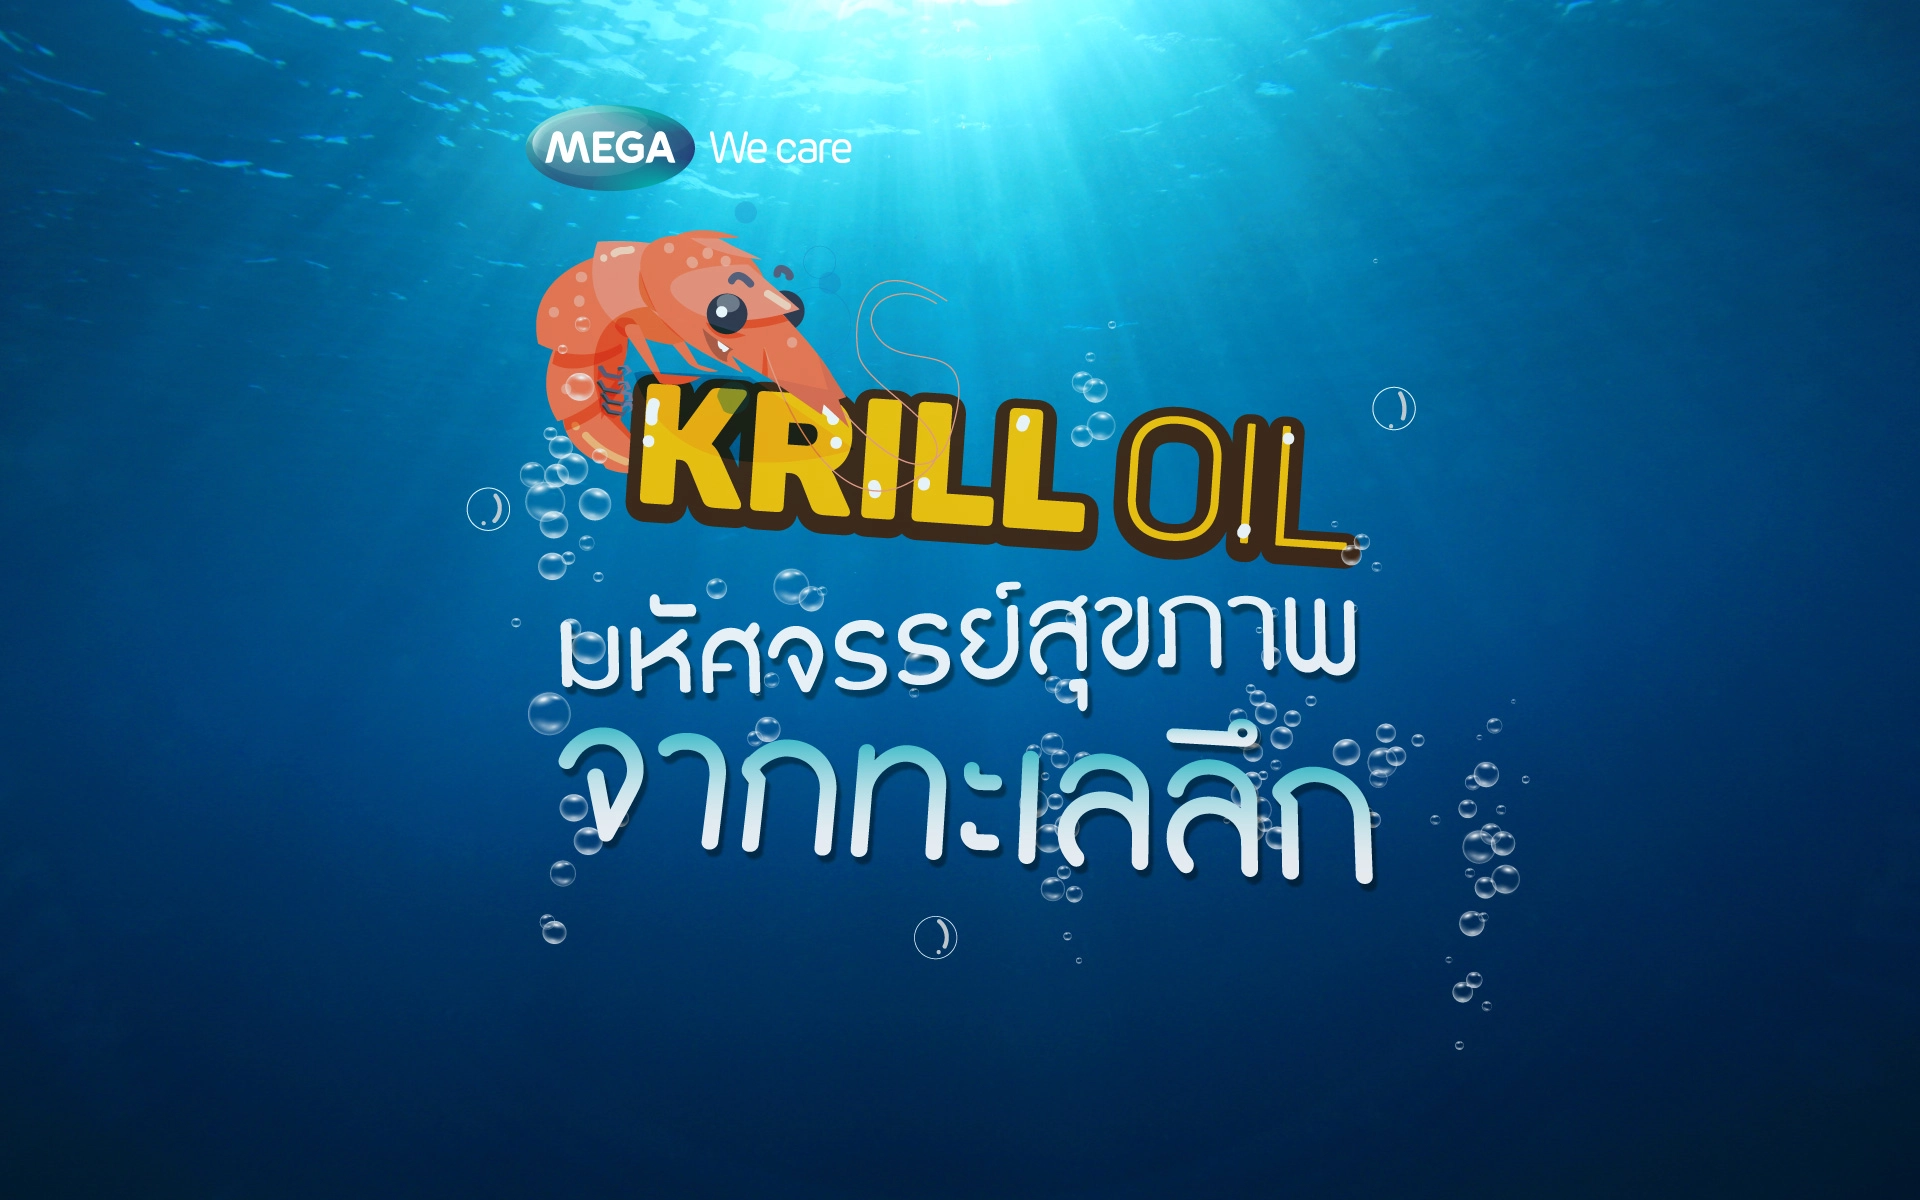 Krill oil, an extract from small shrimps with amazing benefits.